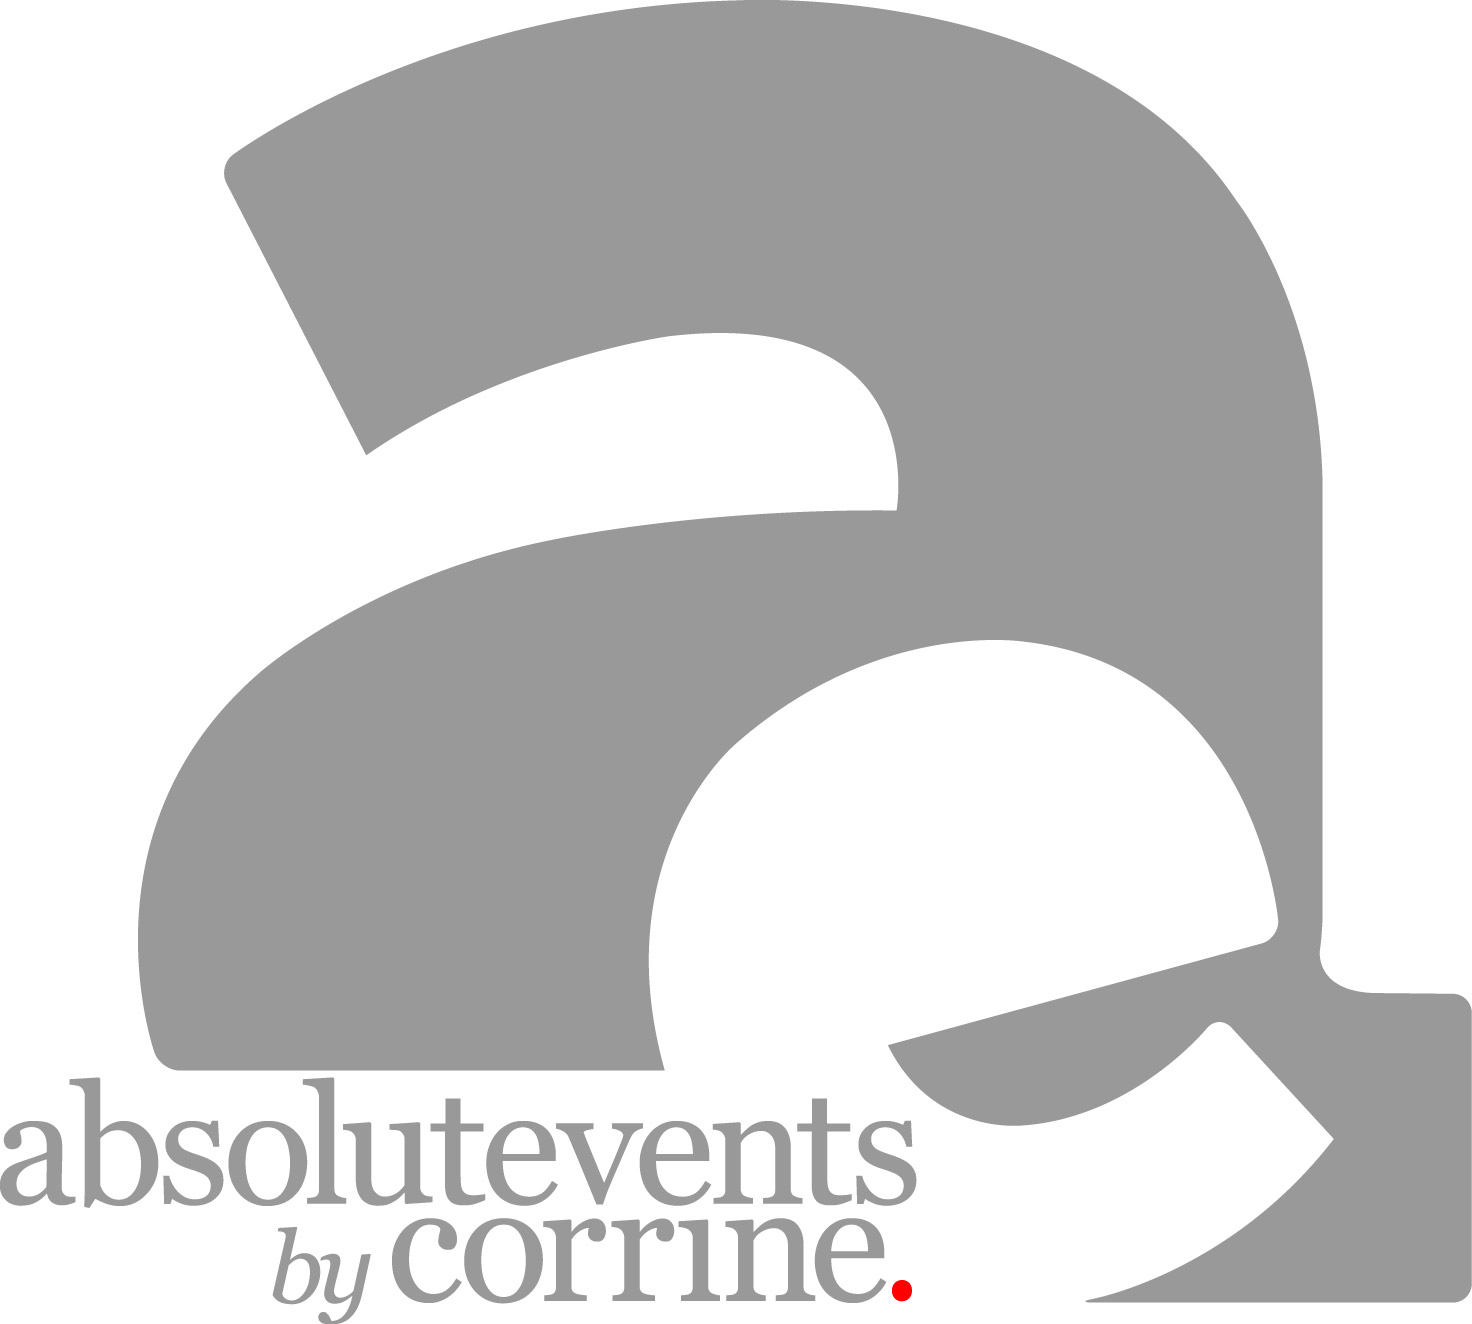 absoltevents_logos_grey-red